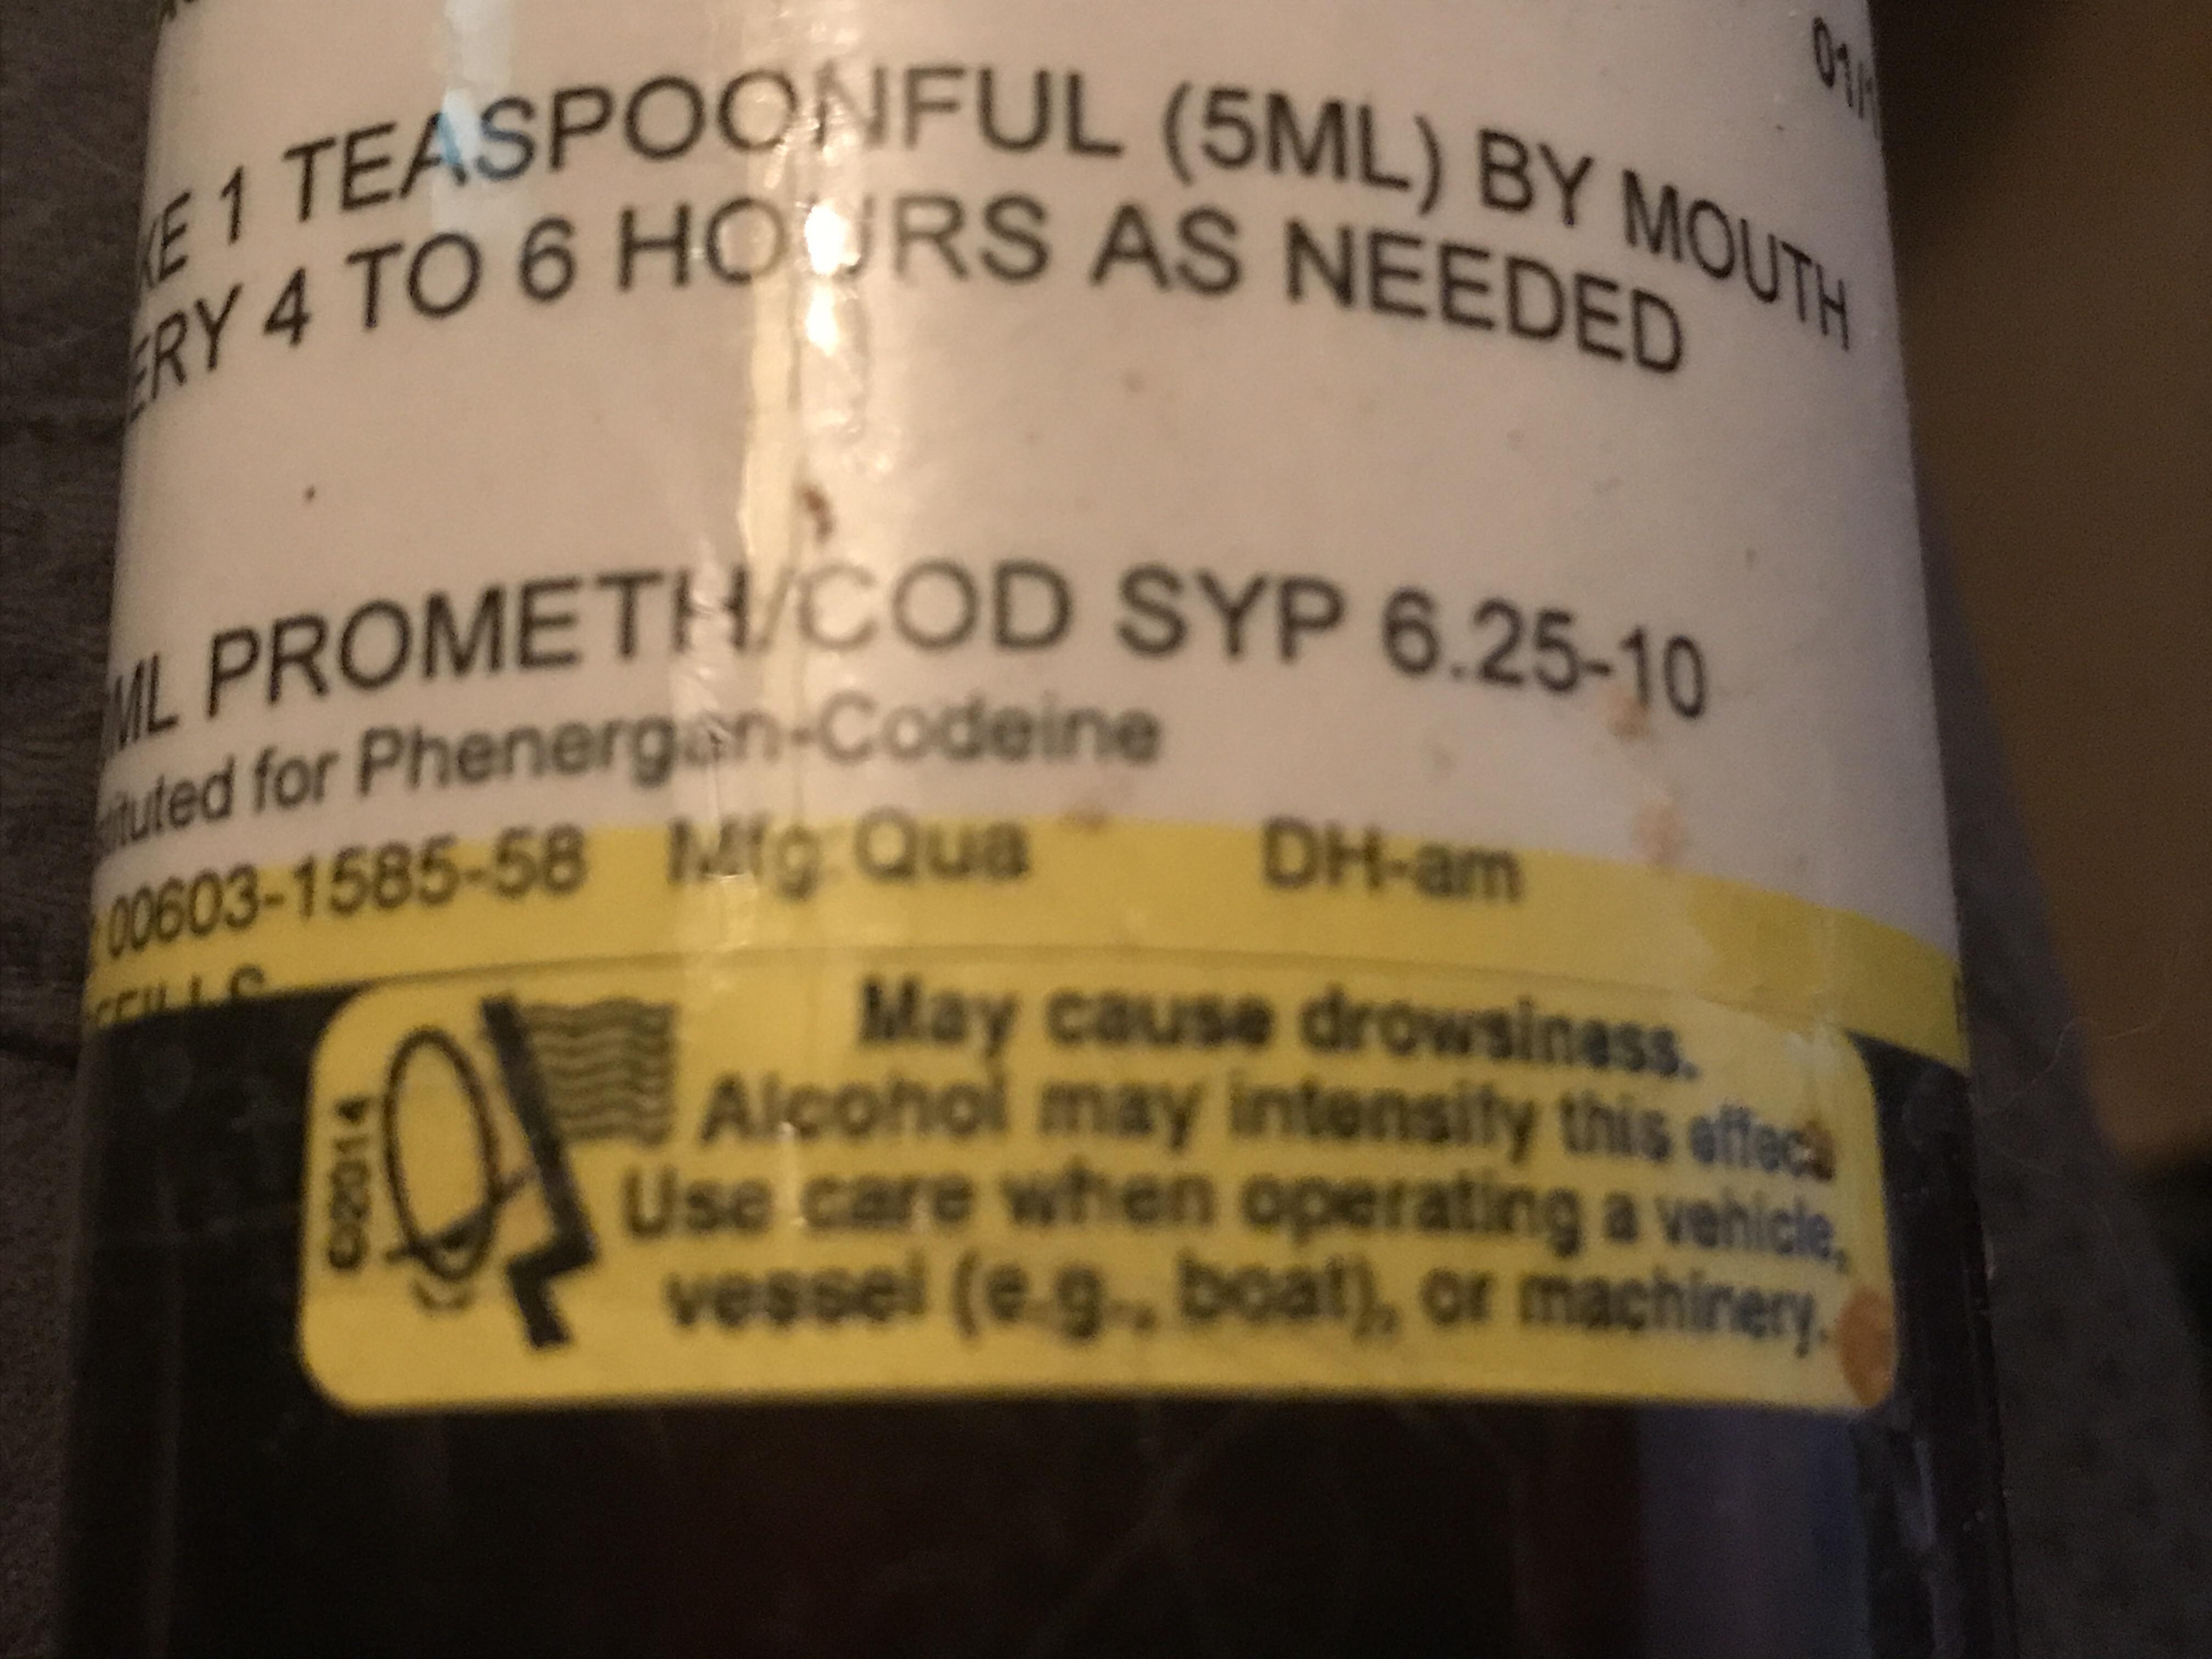 Getting fucked up from promethazine